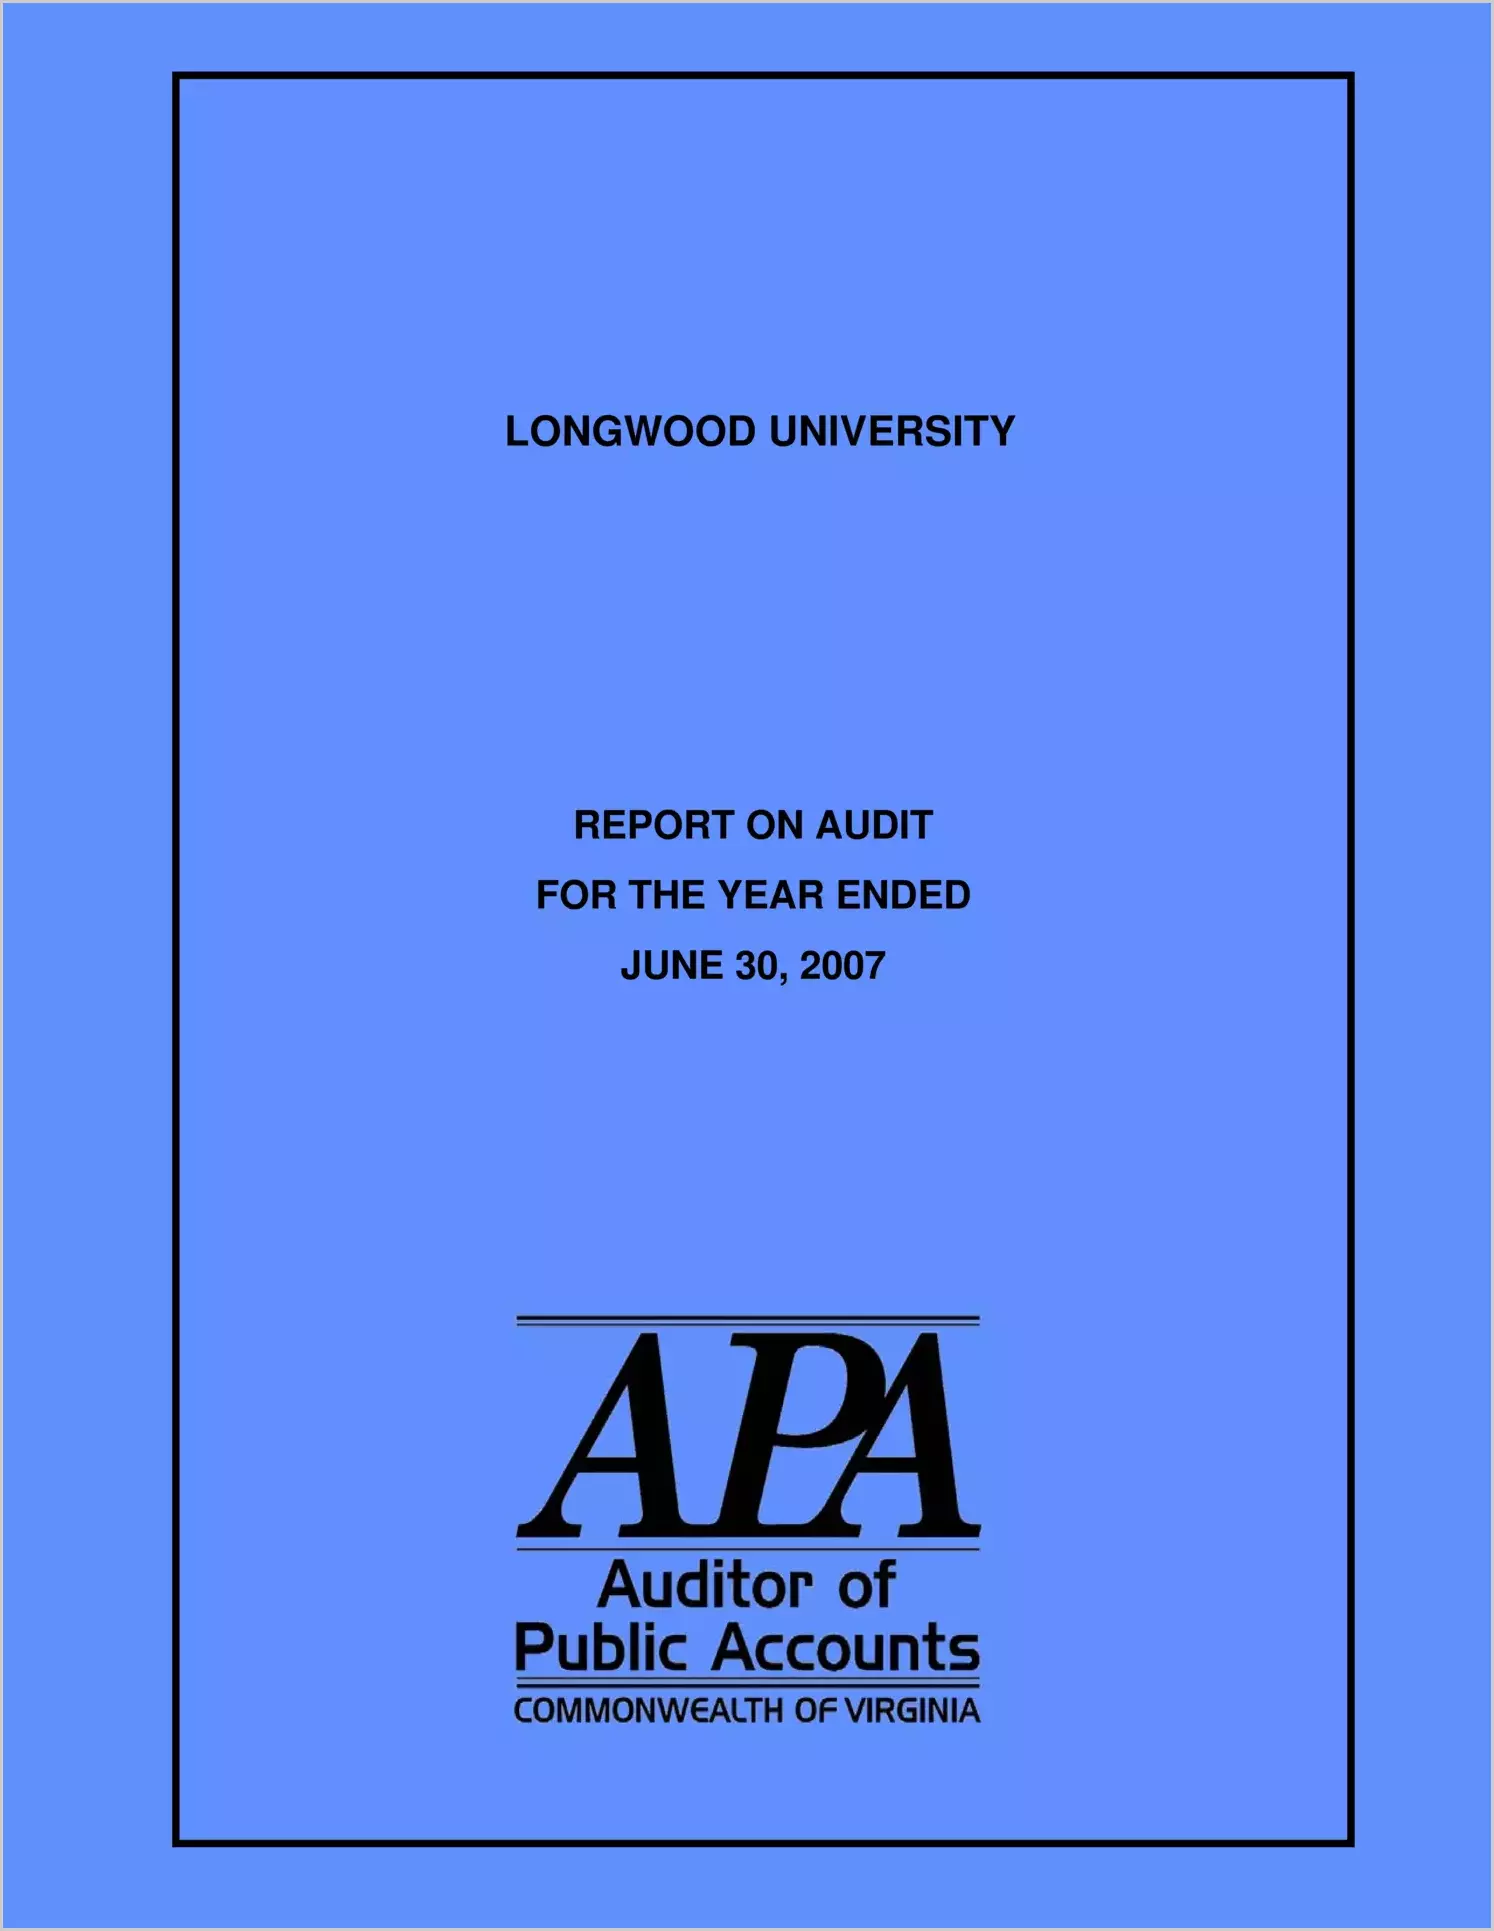 Longwood University report on audit for the year ended June 30, 2007